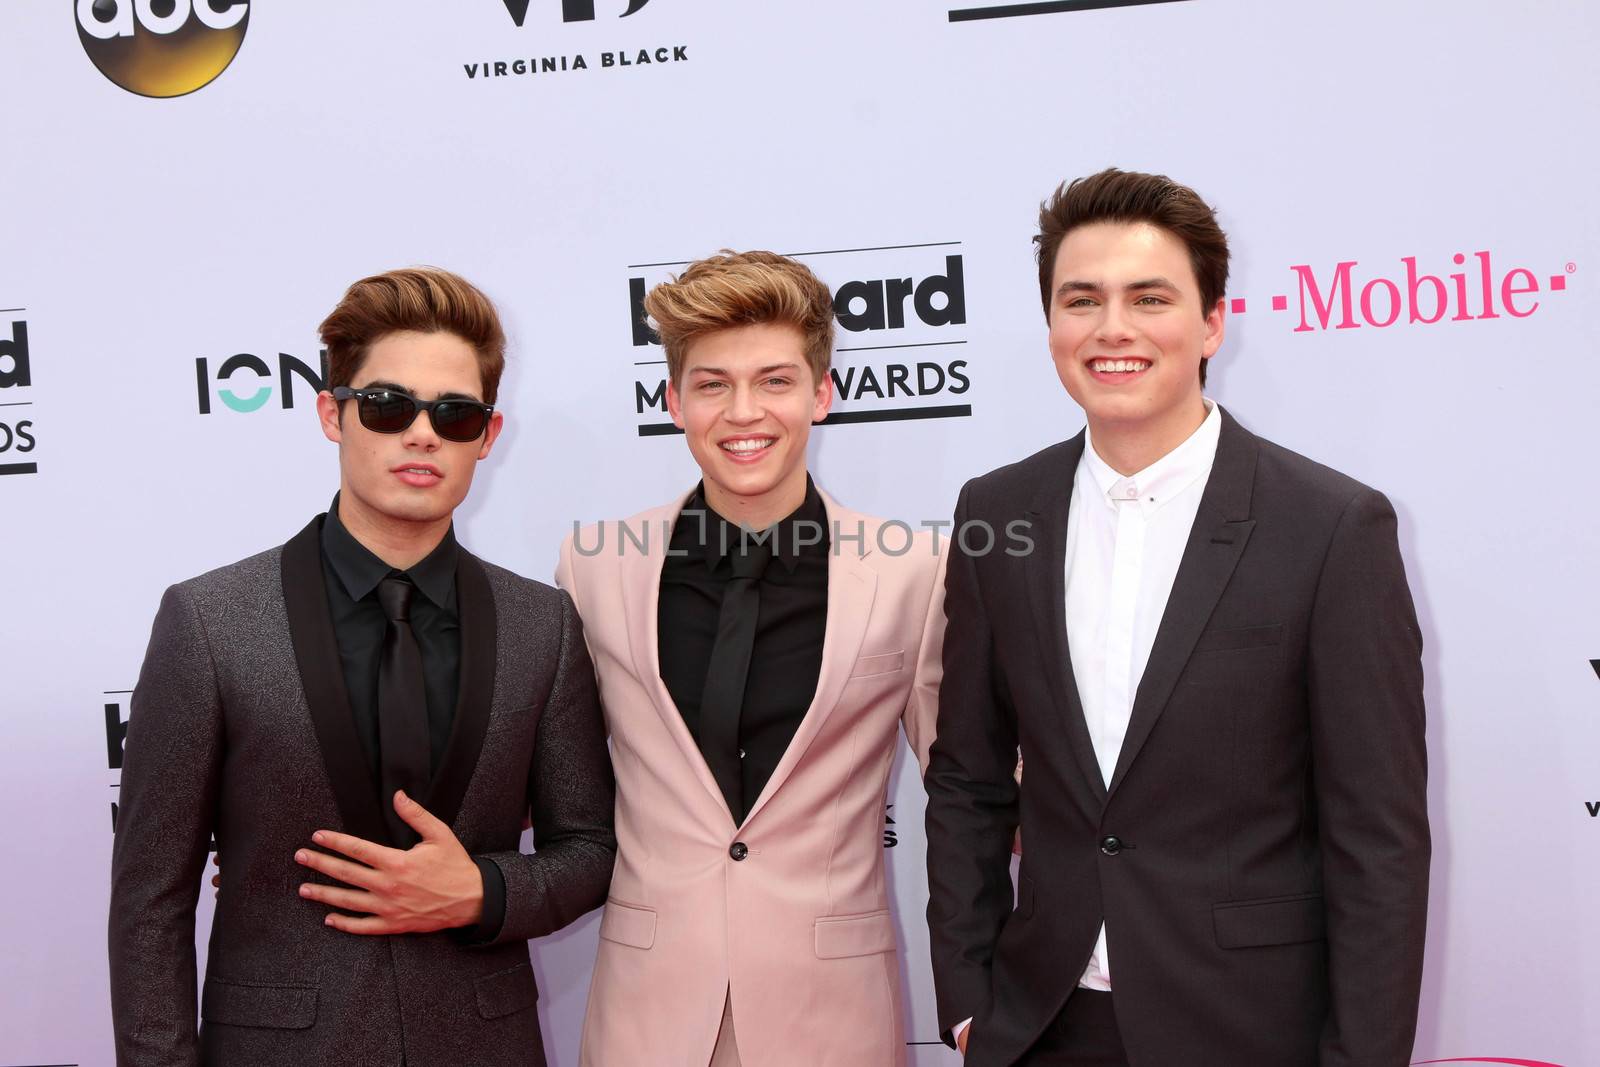 Emery Kelly, Ricky Garcia, Liam Attridge
at the 2017 Billboard Awards Arrivals, T-Mobile Arena, Las Vegas, NV 05-21-17/ImageCollect by ImageCollect